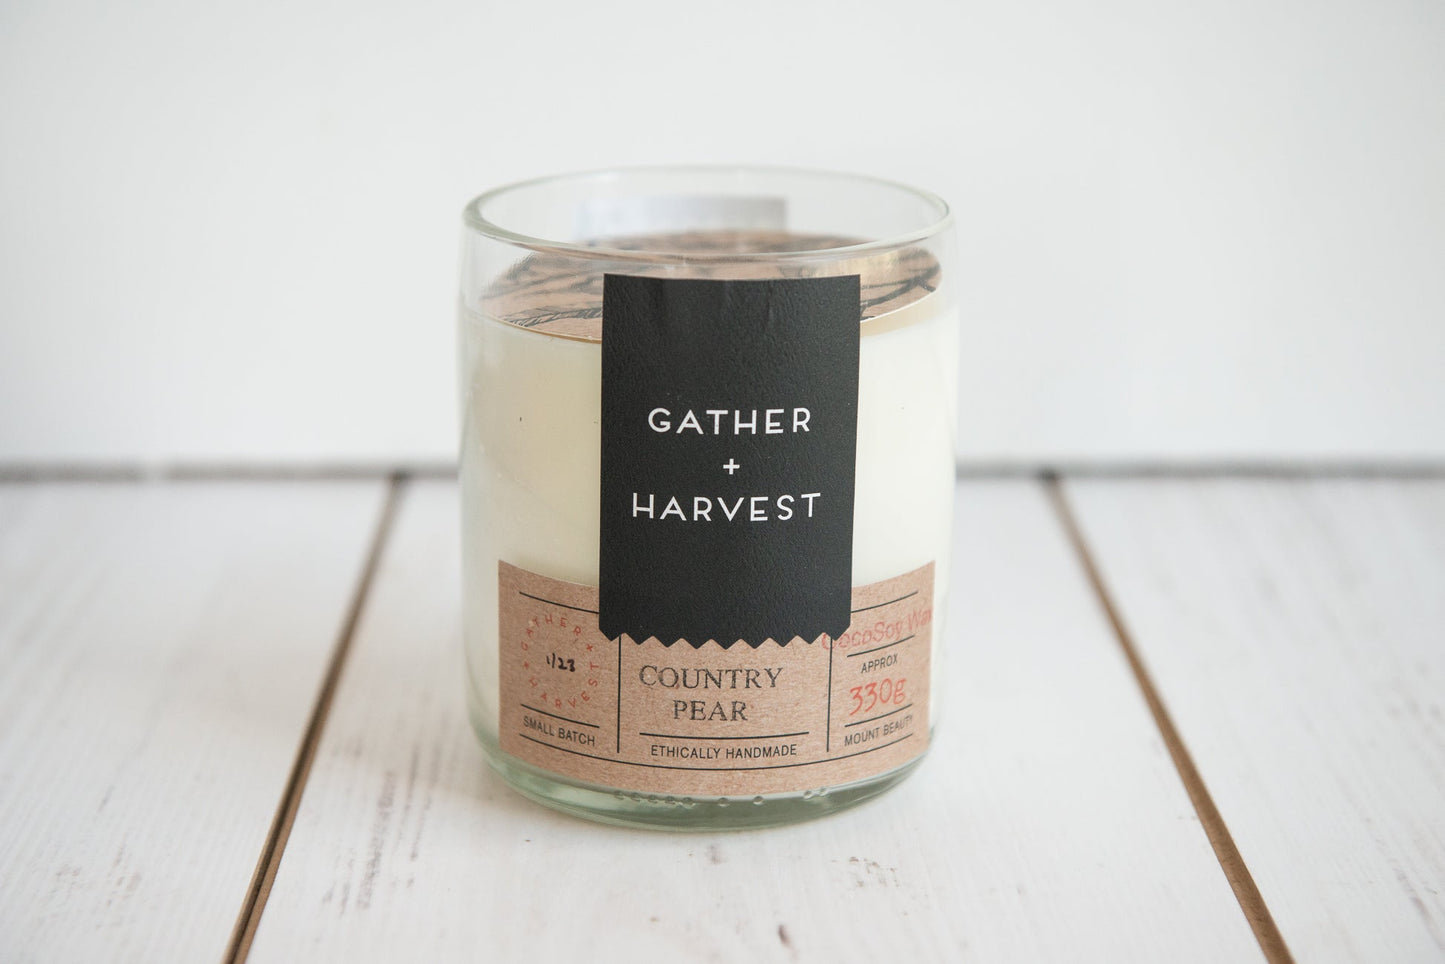 The handmade Country Pear CocoSoy candle is ethically made in Mt Beauty as part of a small batch